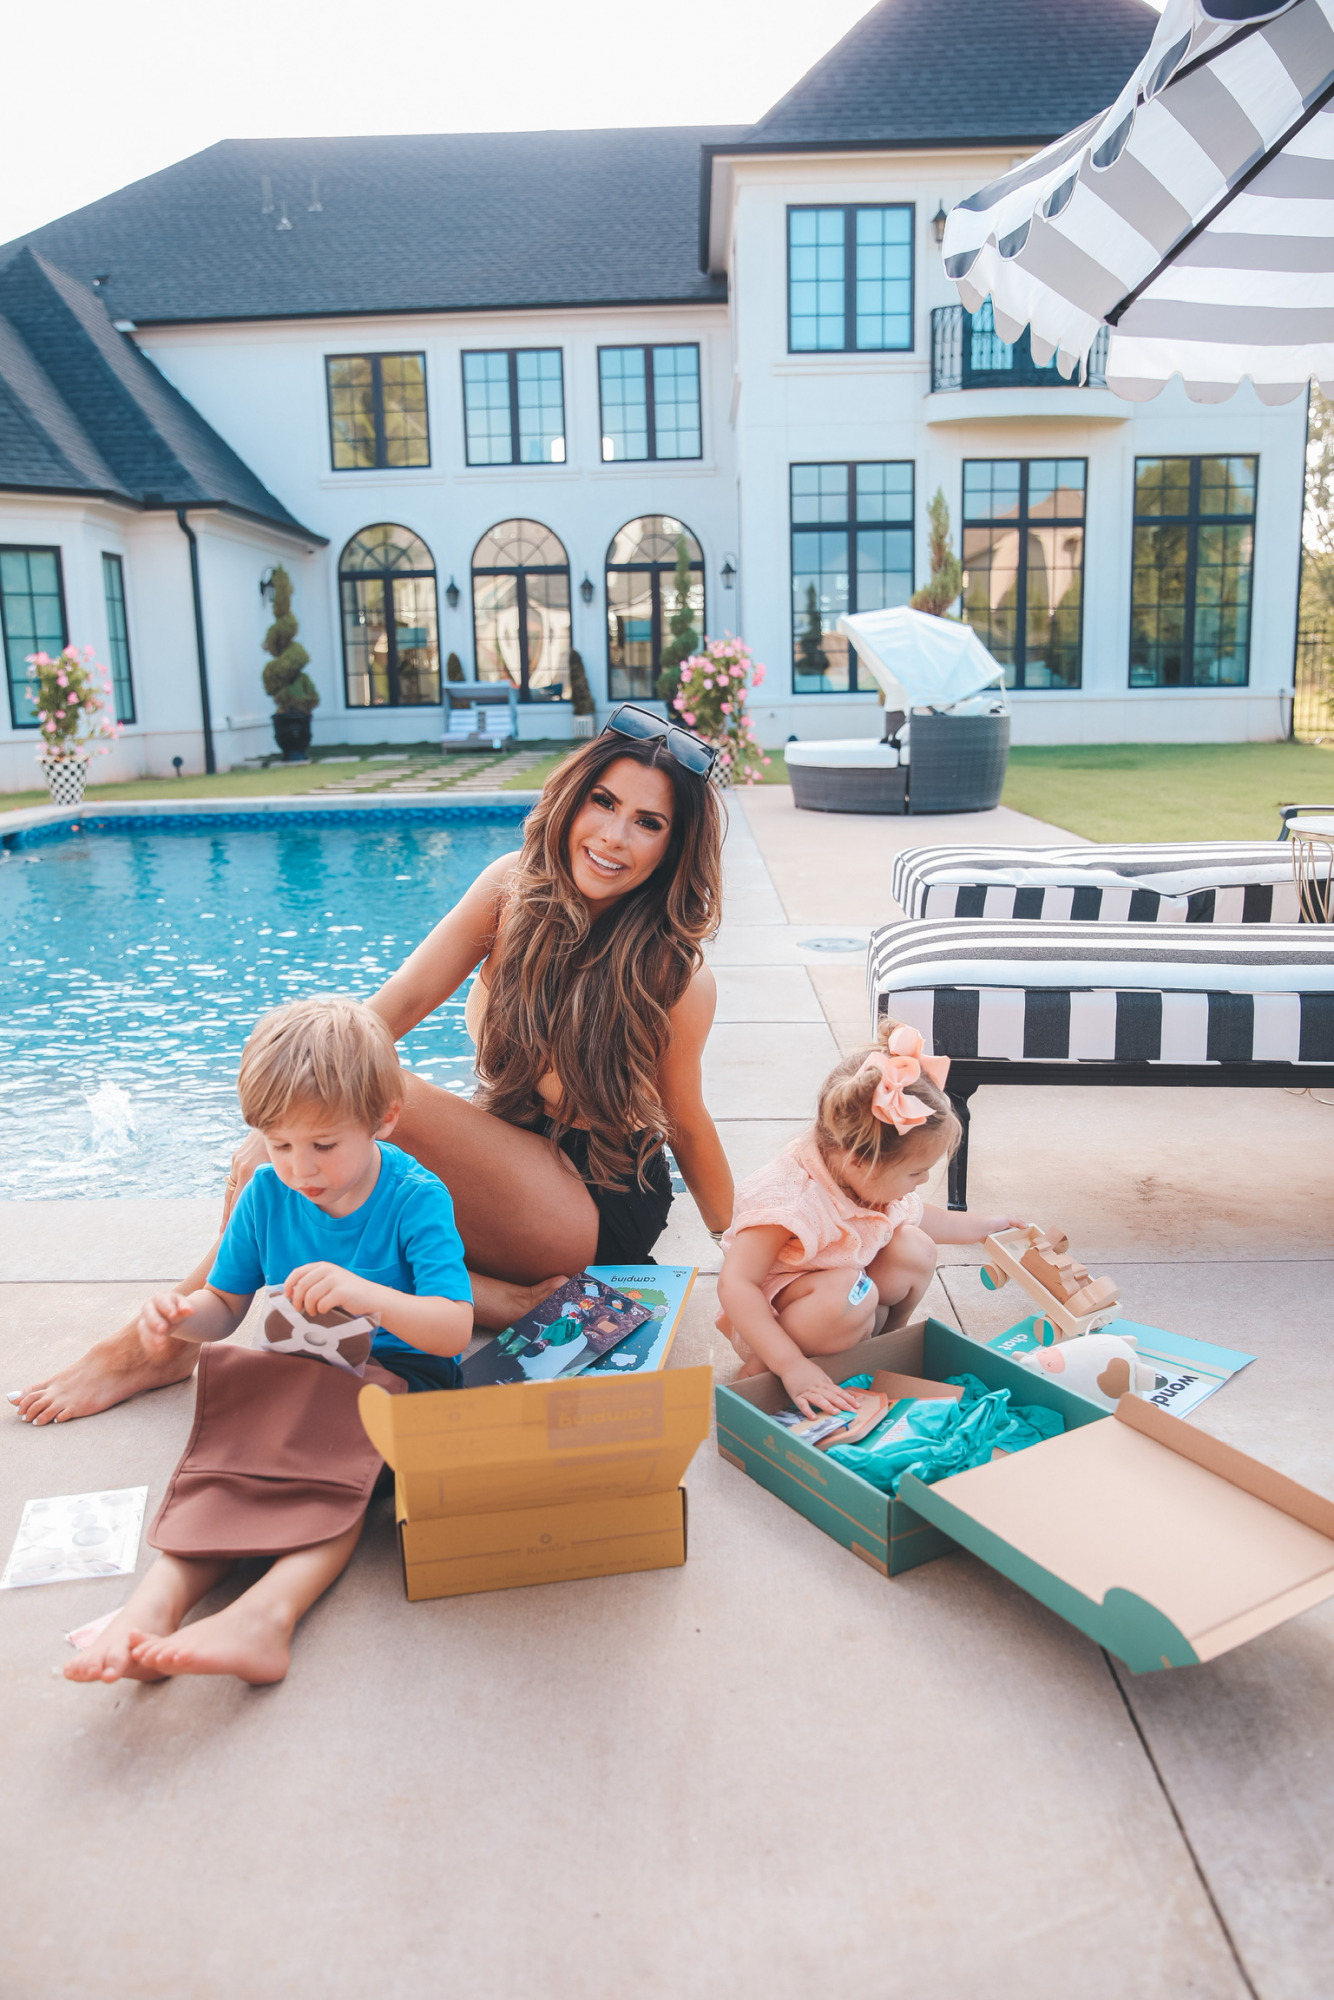 Emily Ann Gemma Family, Luke Gemma, Sophia Gemma, Kids Toys, Kids Educational Toys, KiwiCo. , Best toys and activities for kids, summer activities for kids | Instagram Recap by popular US life and style blog, The Sweetest Thing: image of Emily Gemma and her two kids sitting by their pool and opening some KiwiCo boxes. 